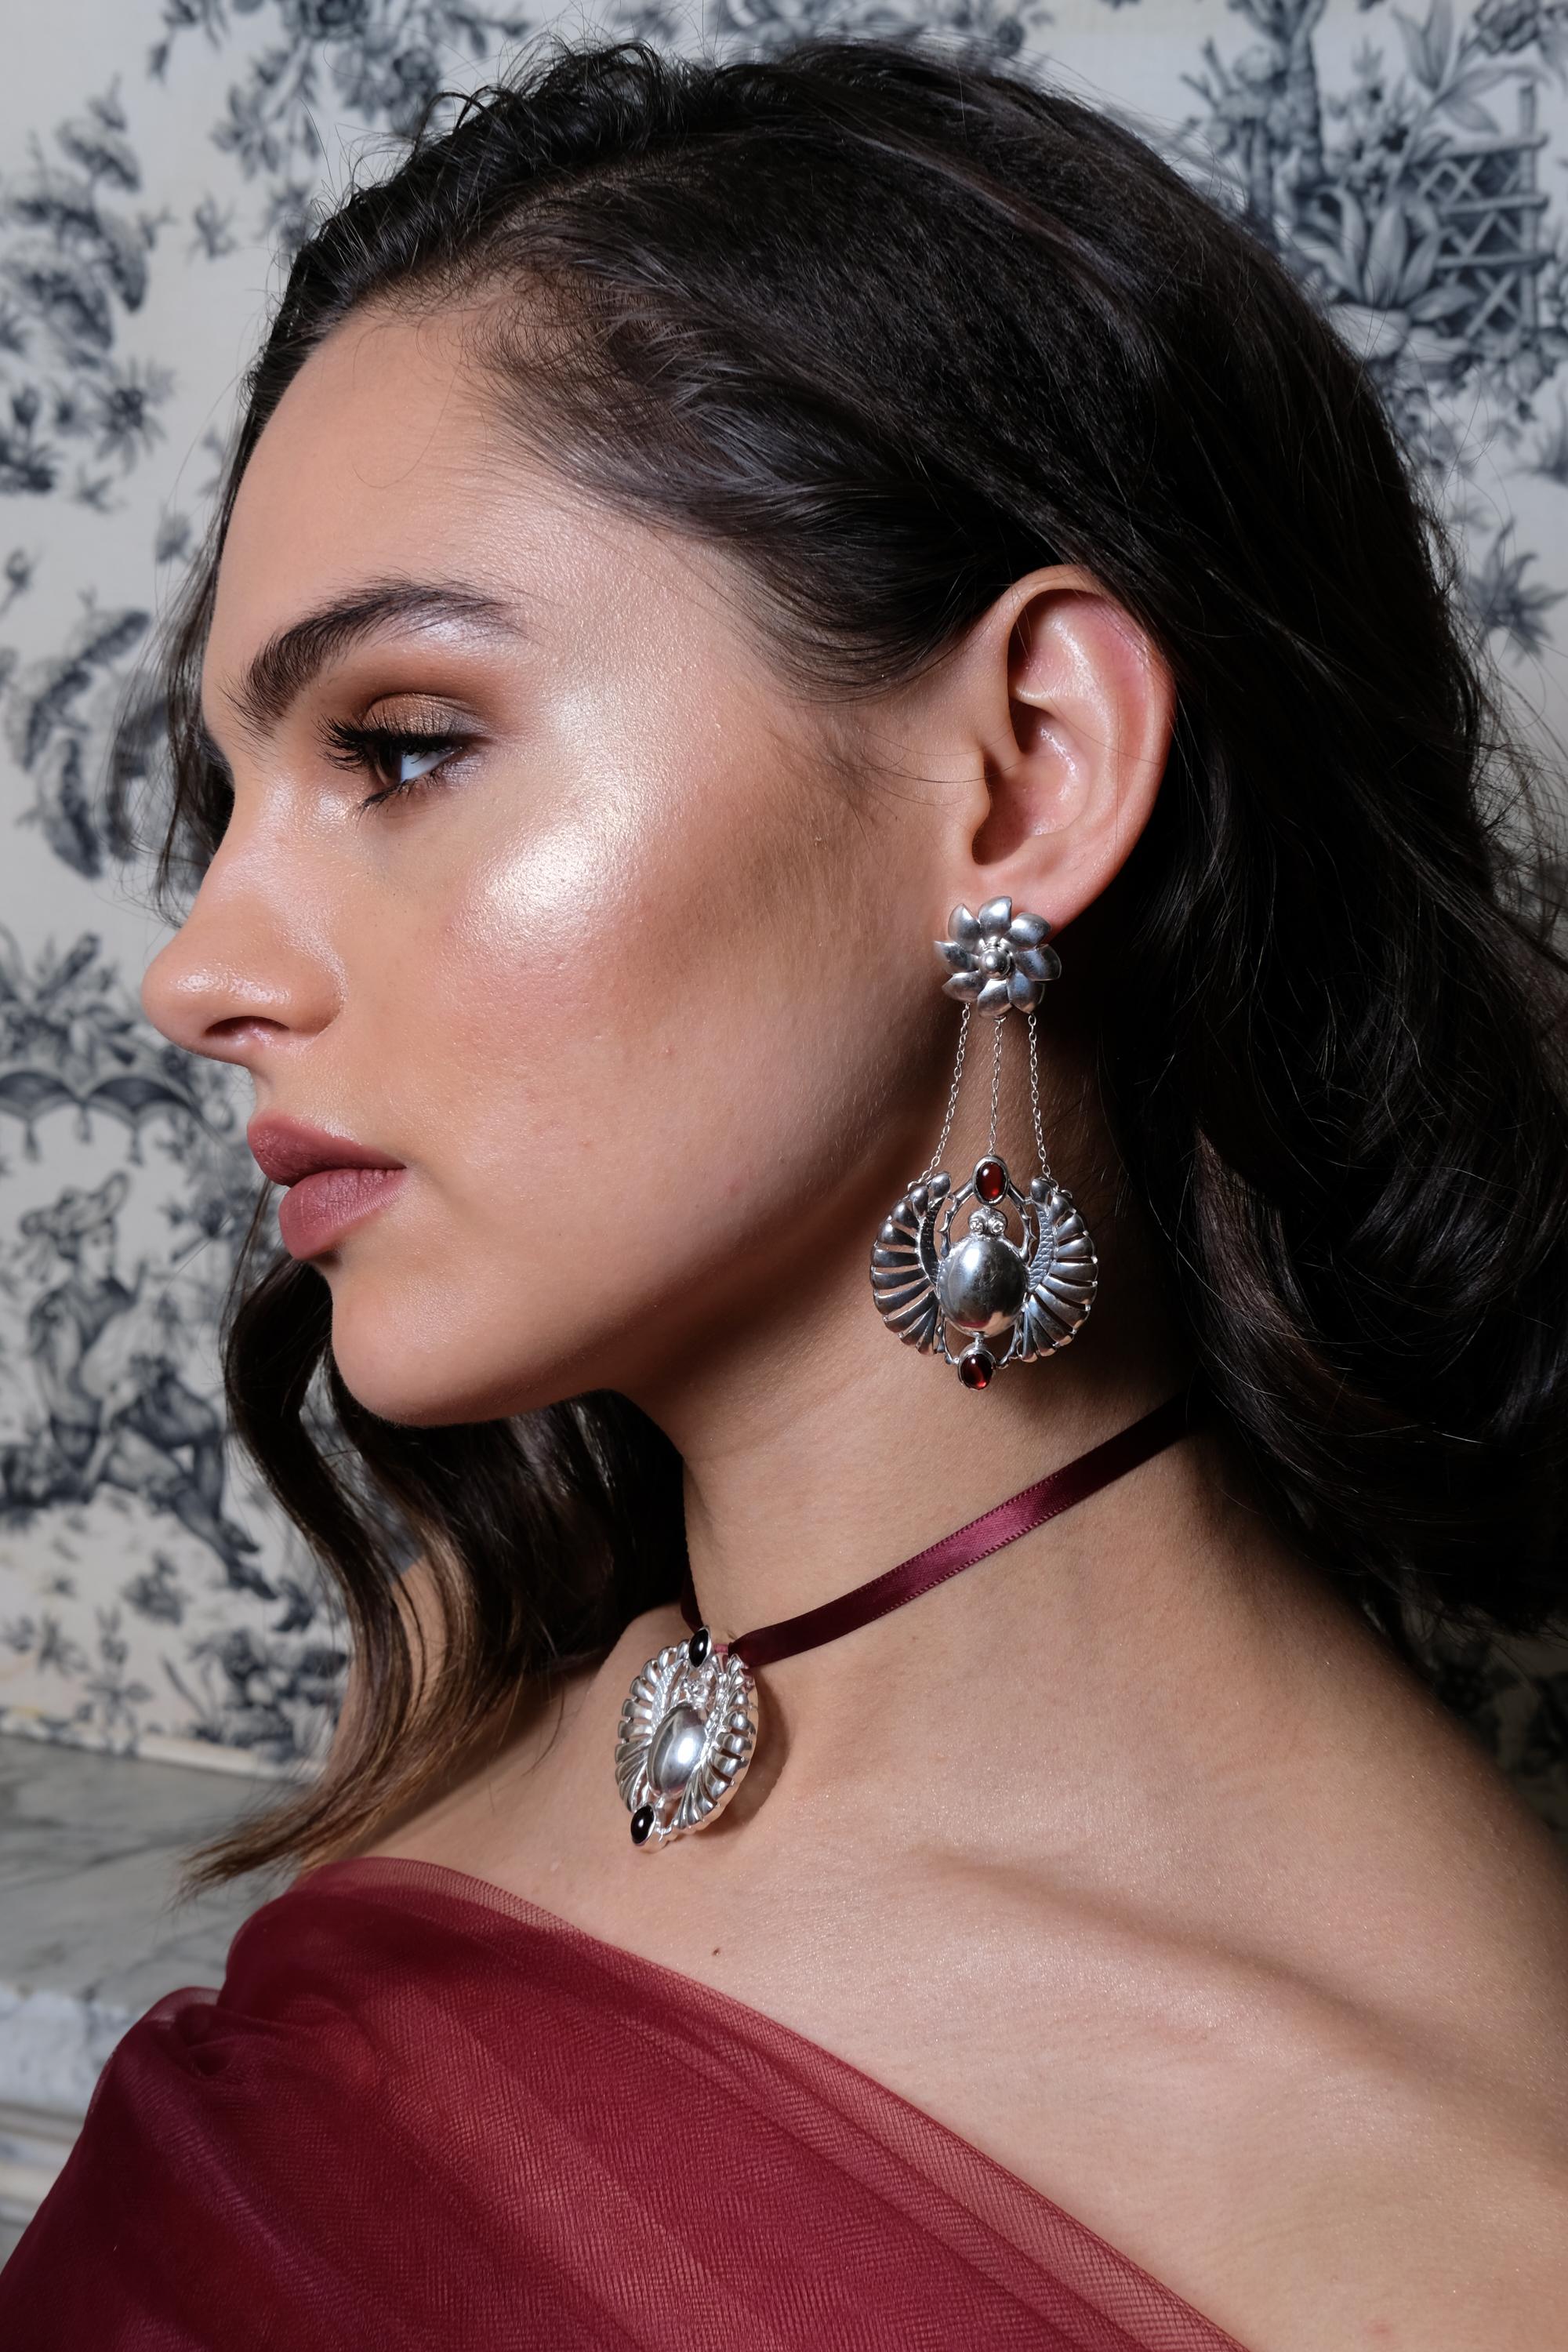 This pair of open winged scarab earrings are the sure way to make a statement to spark a cultural conversation. 18K Gold plated brass or Sterling silver
Gemstones: Cabernet Red Garnet, Lemon Citrine, chocolate diamond eyes.
Post earrings with broad